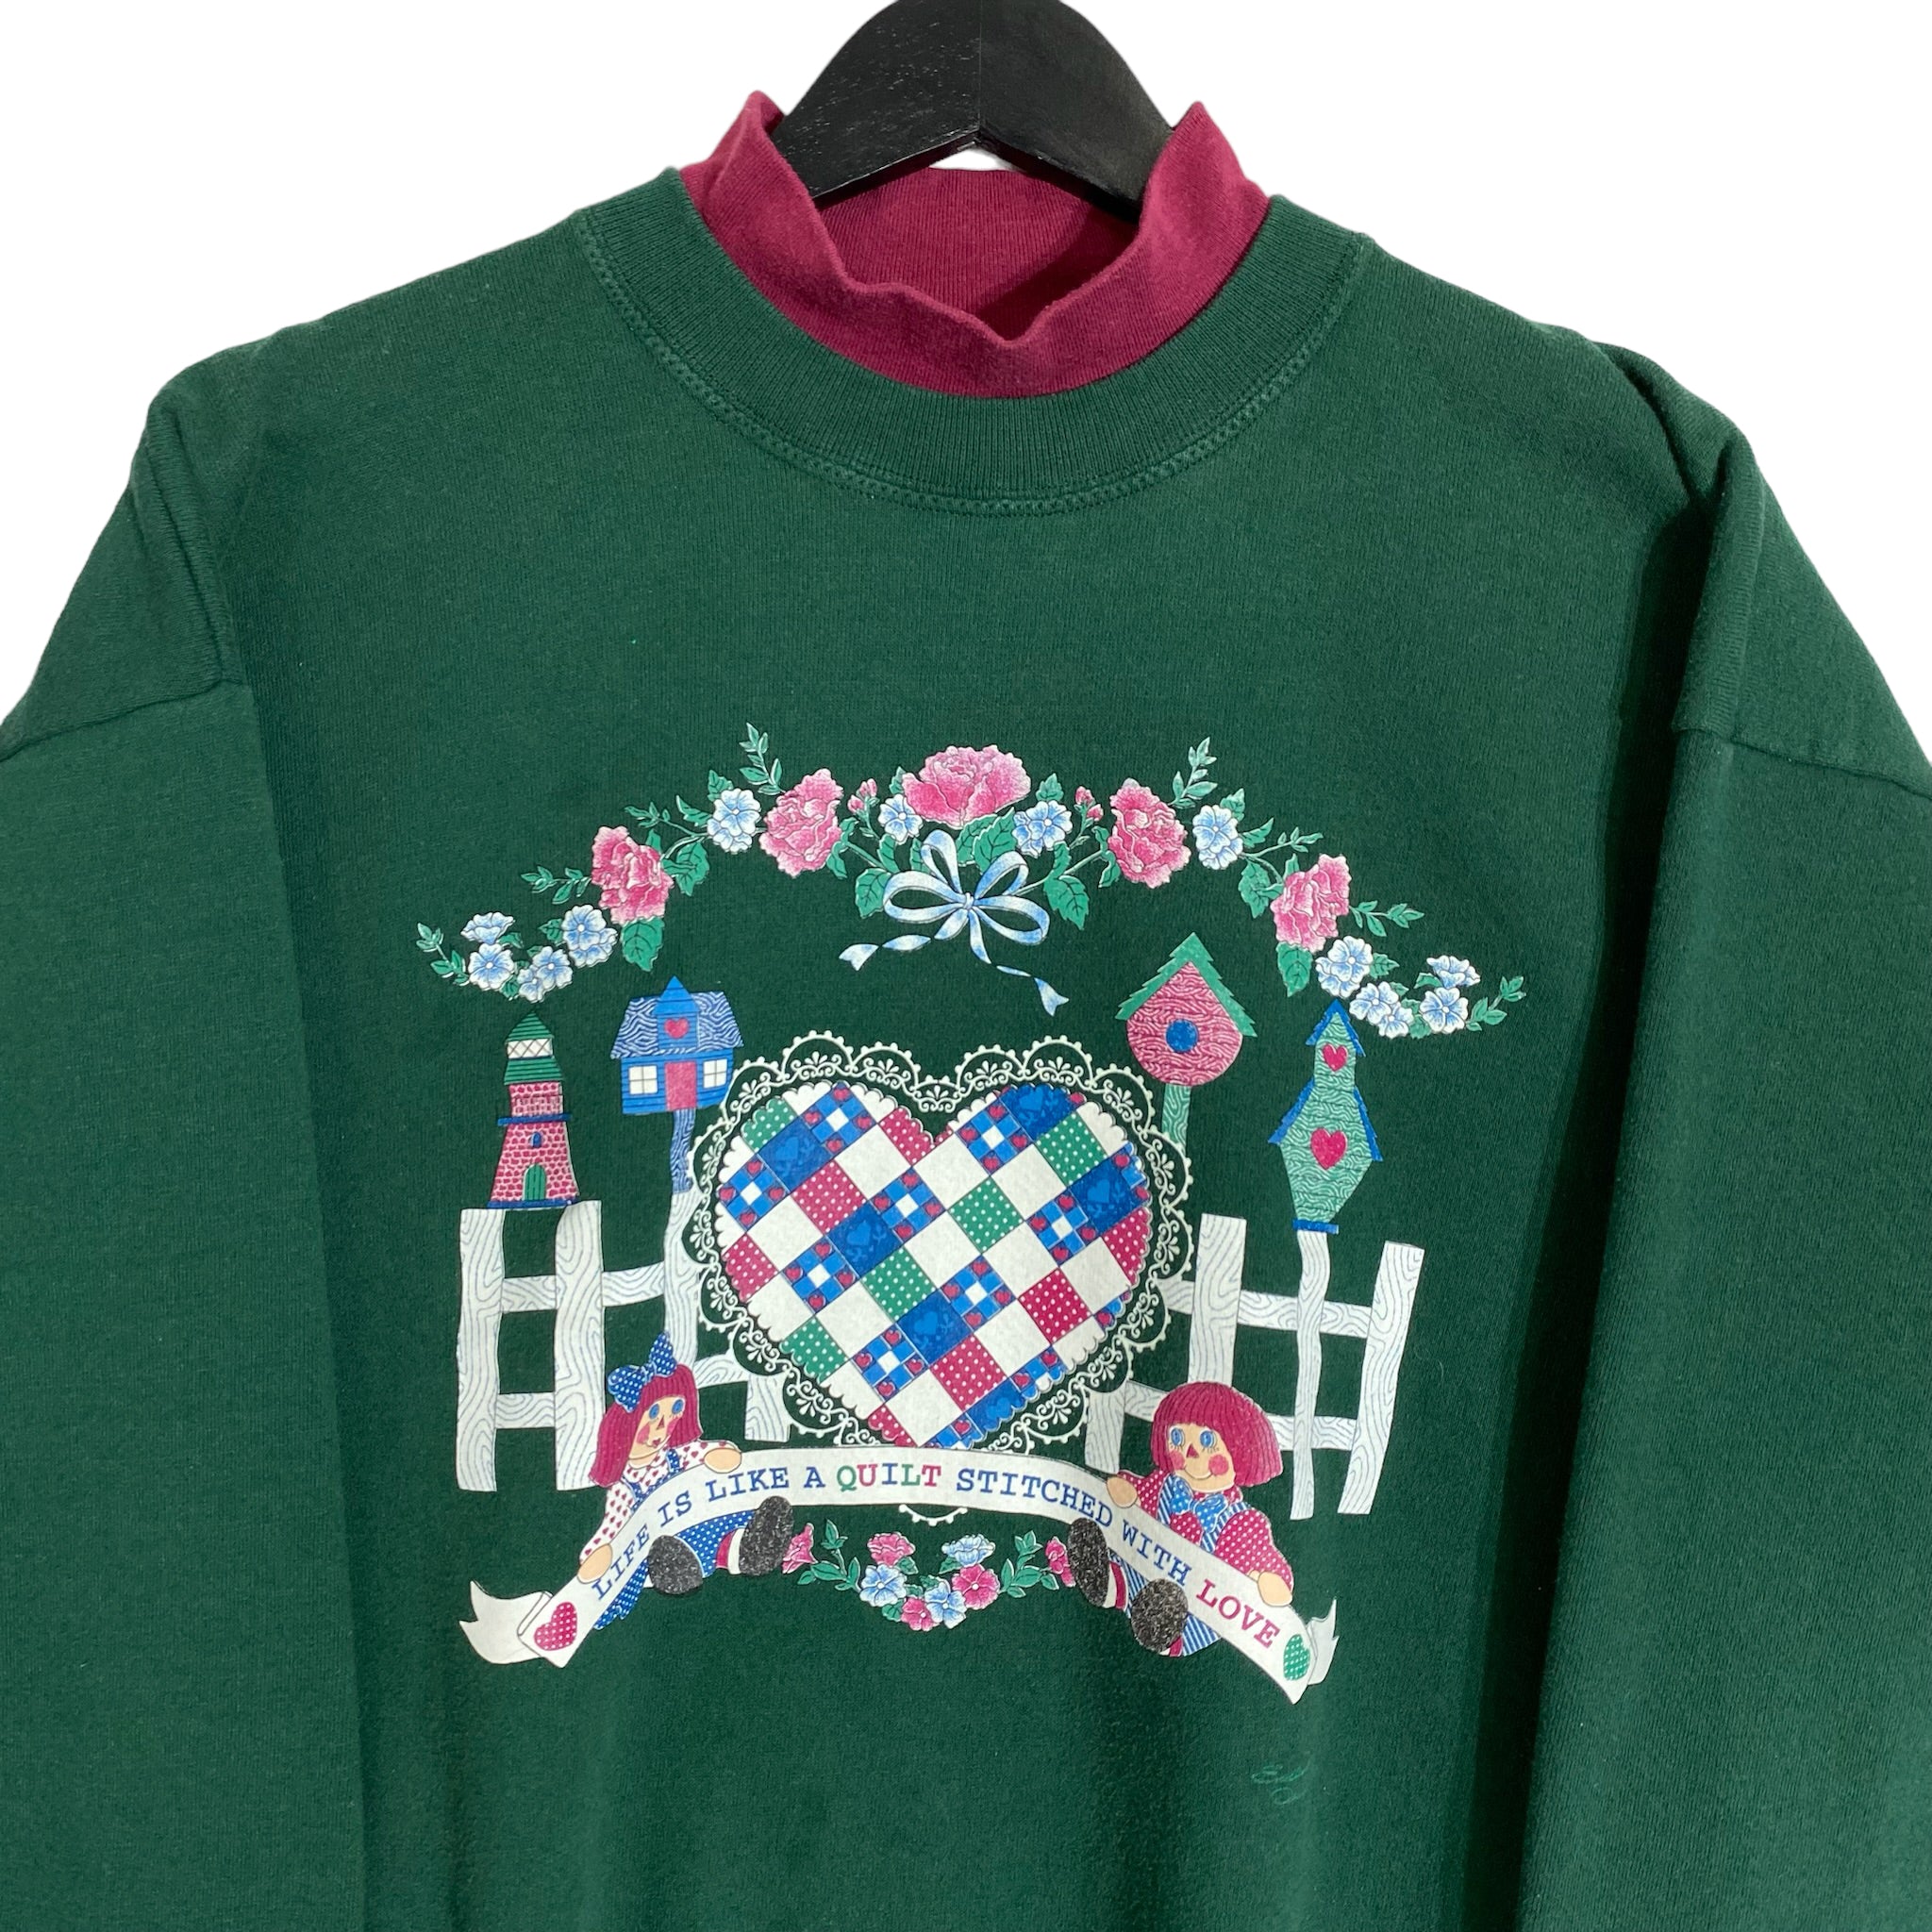 Vintage "Life Is Like a Quilt Stitched With Love" Crewneck